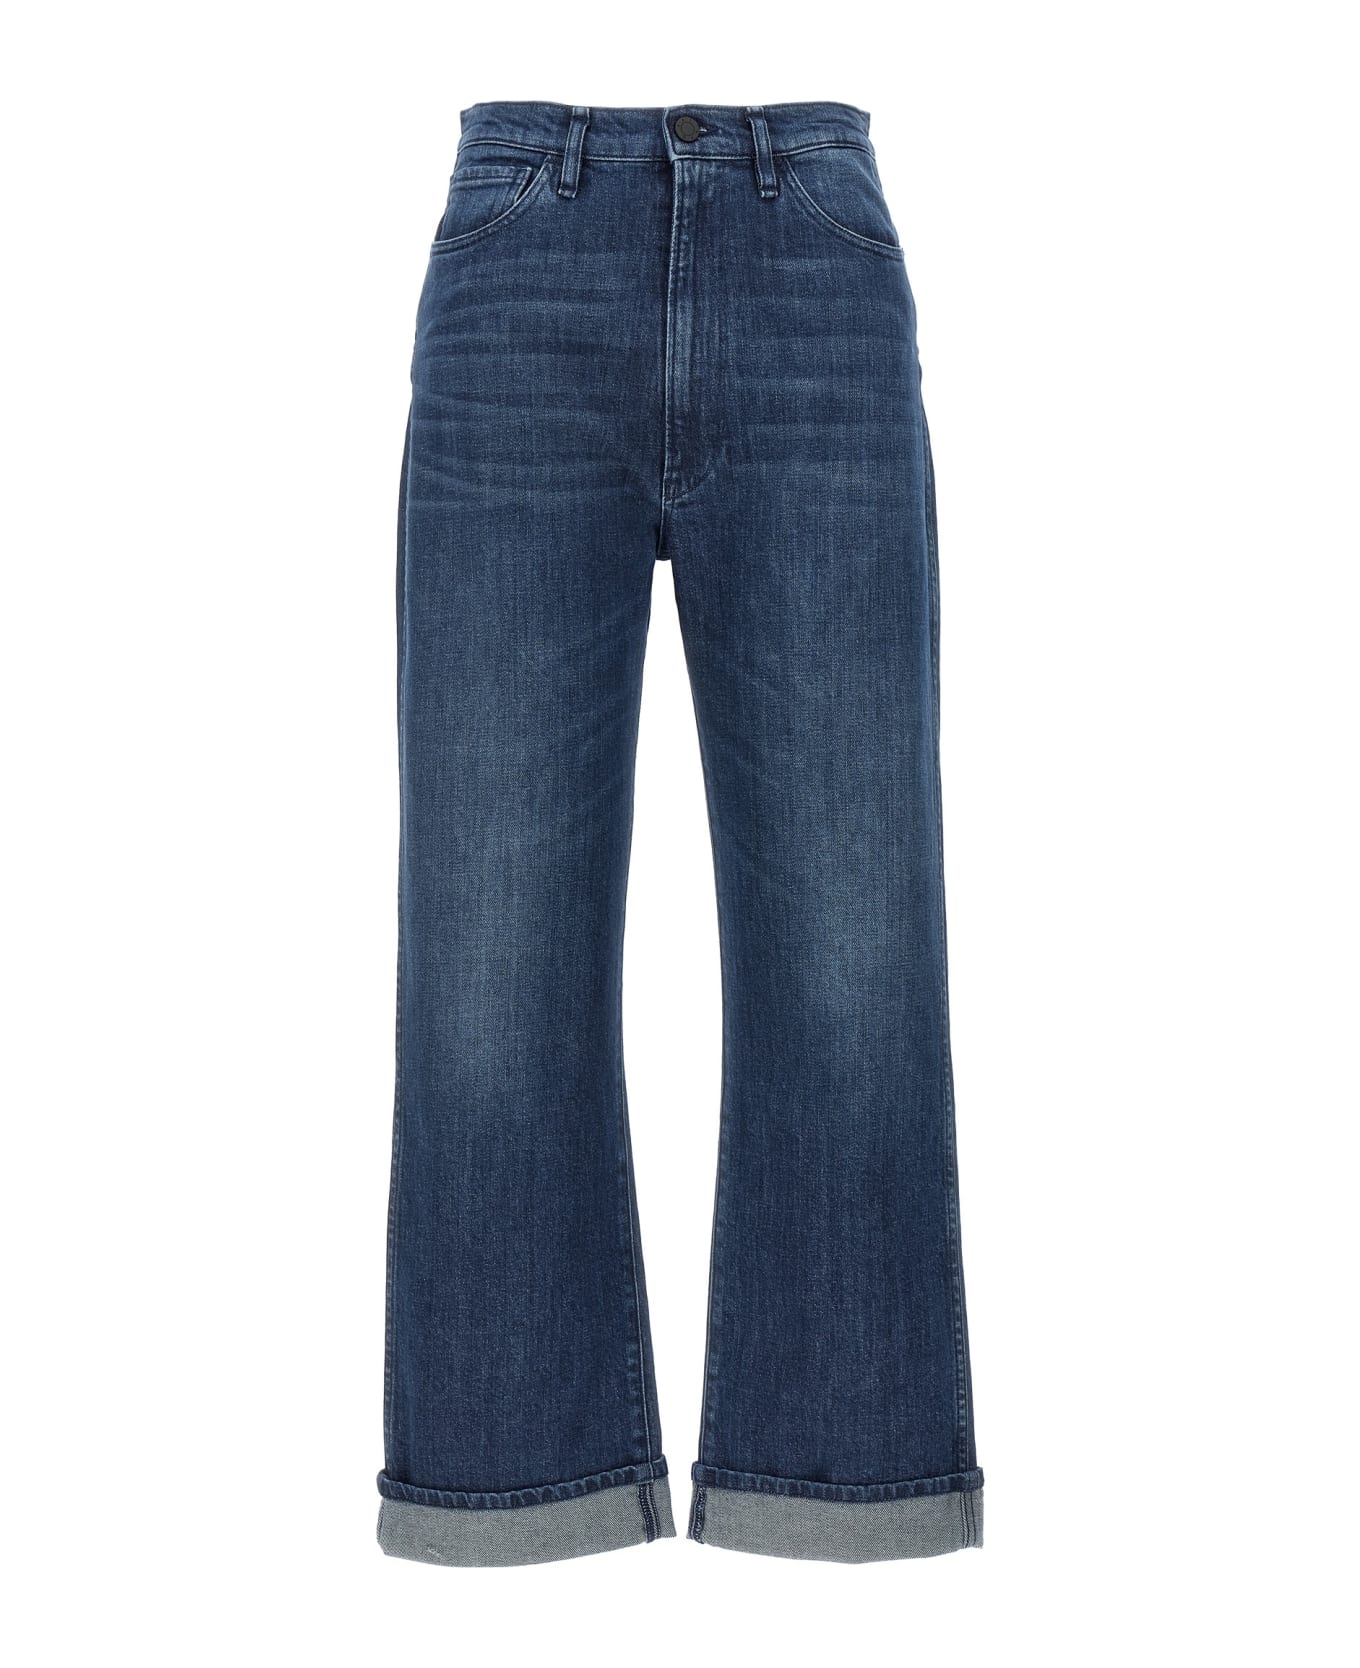 3x1 'claudia Extreme' Jeans - Blue